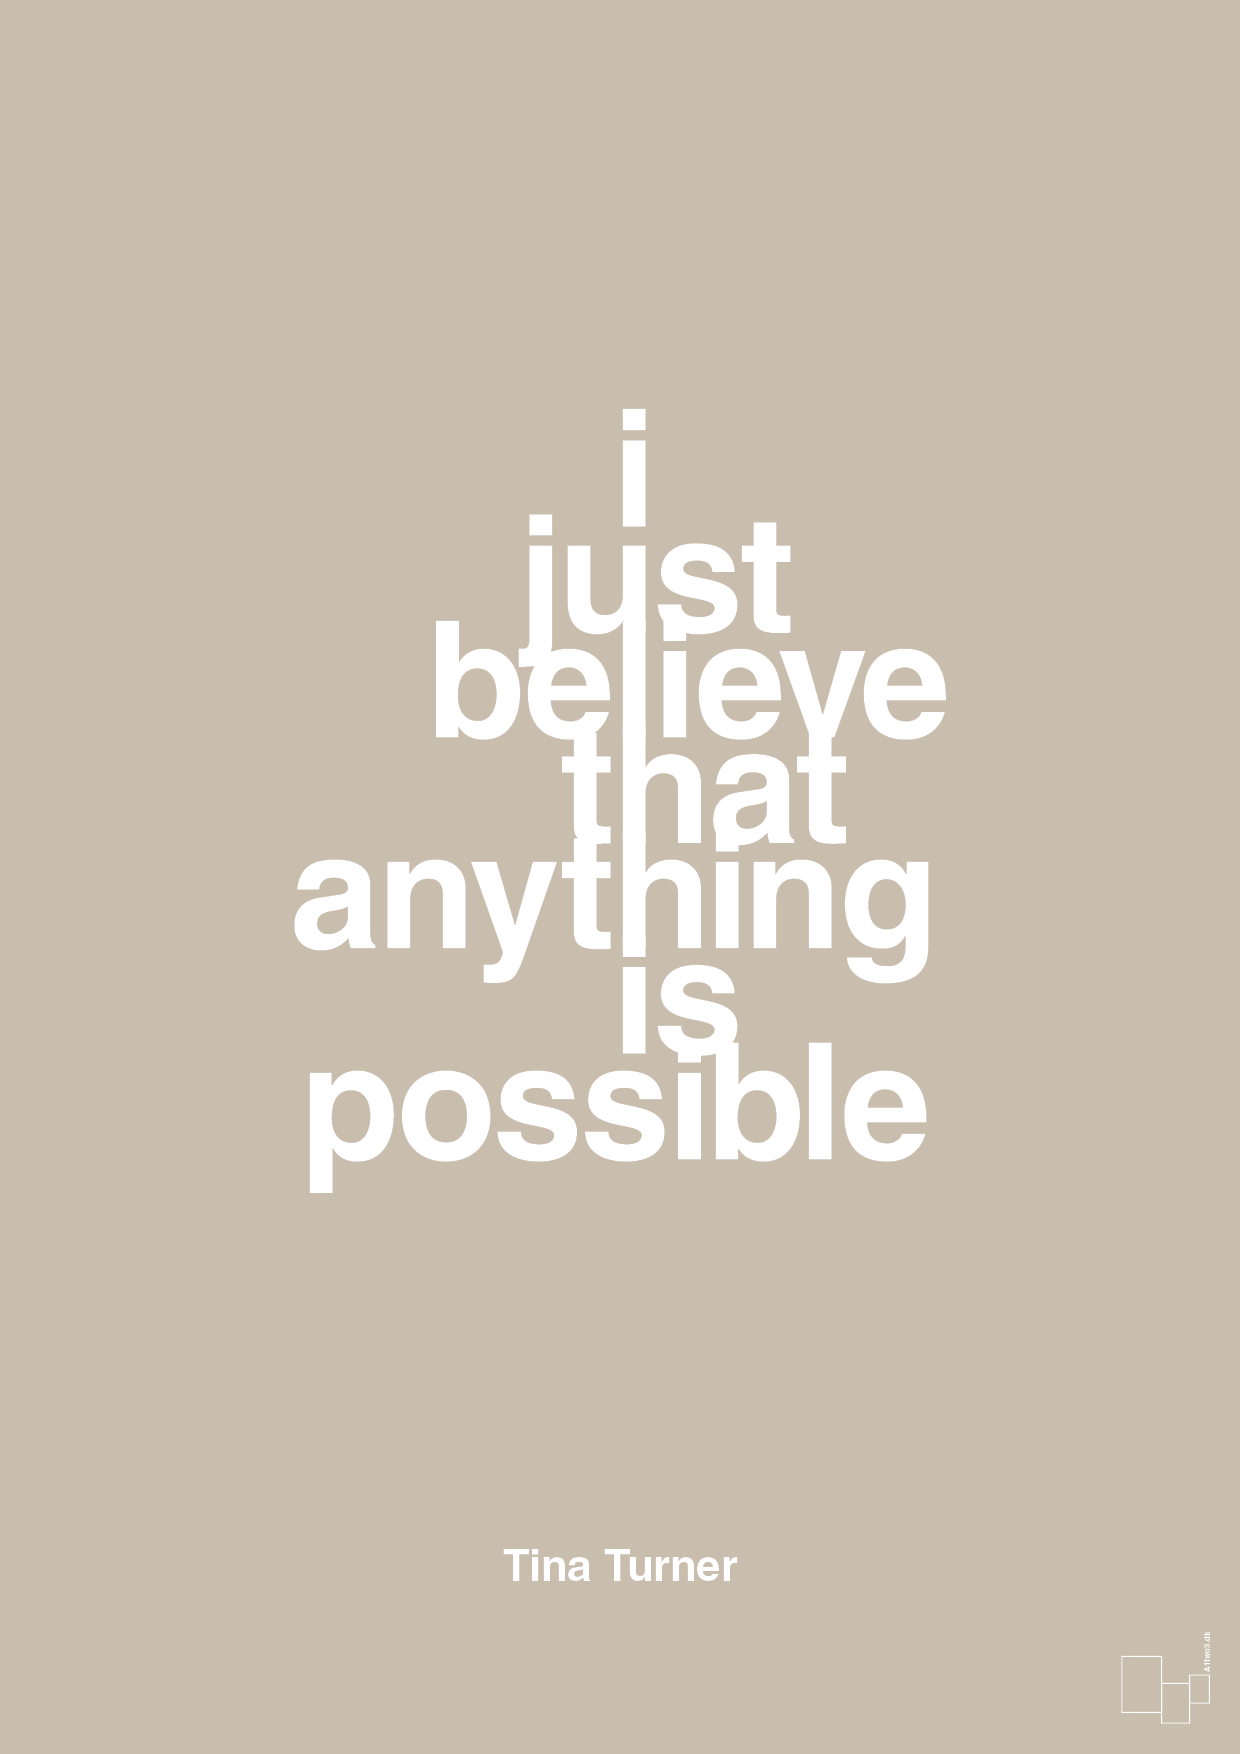 i just believe that anything is possible - Plakat med Citater i Creamy Mushroom